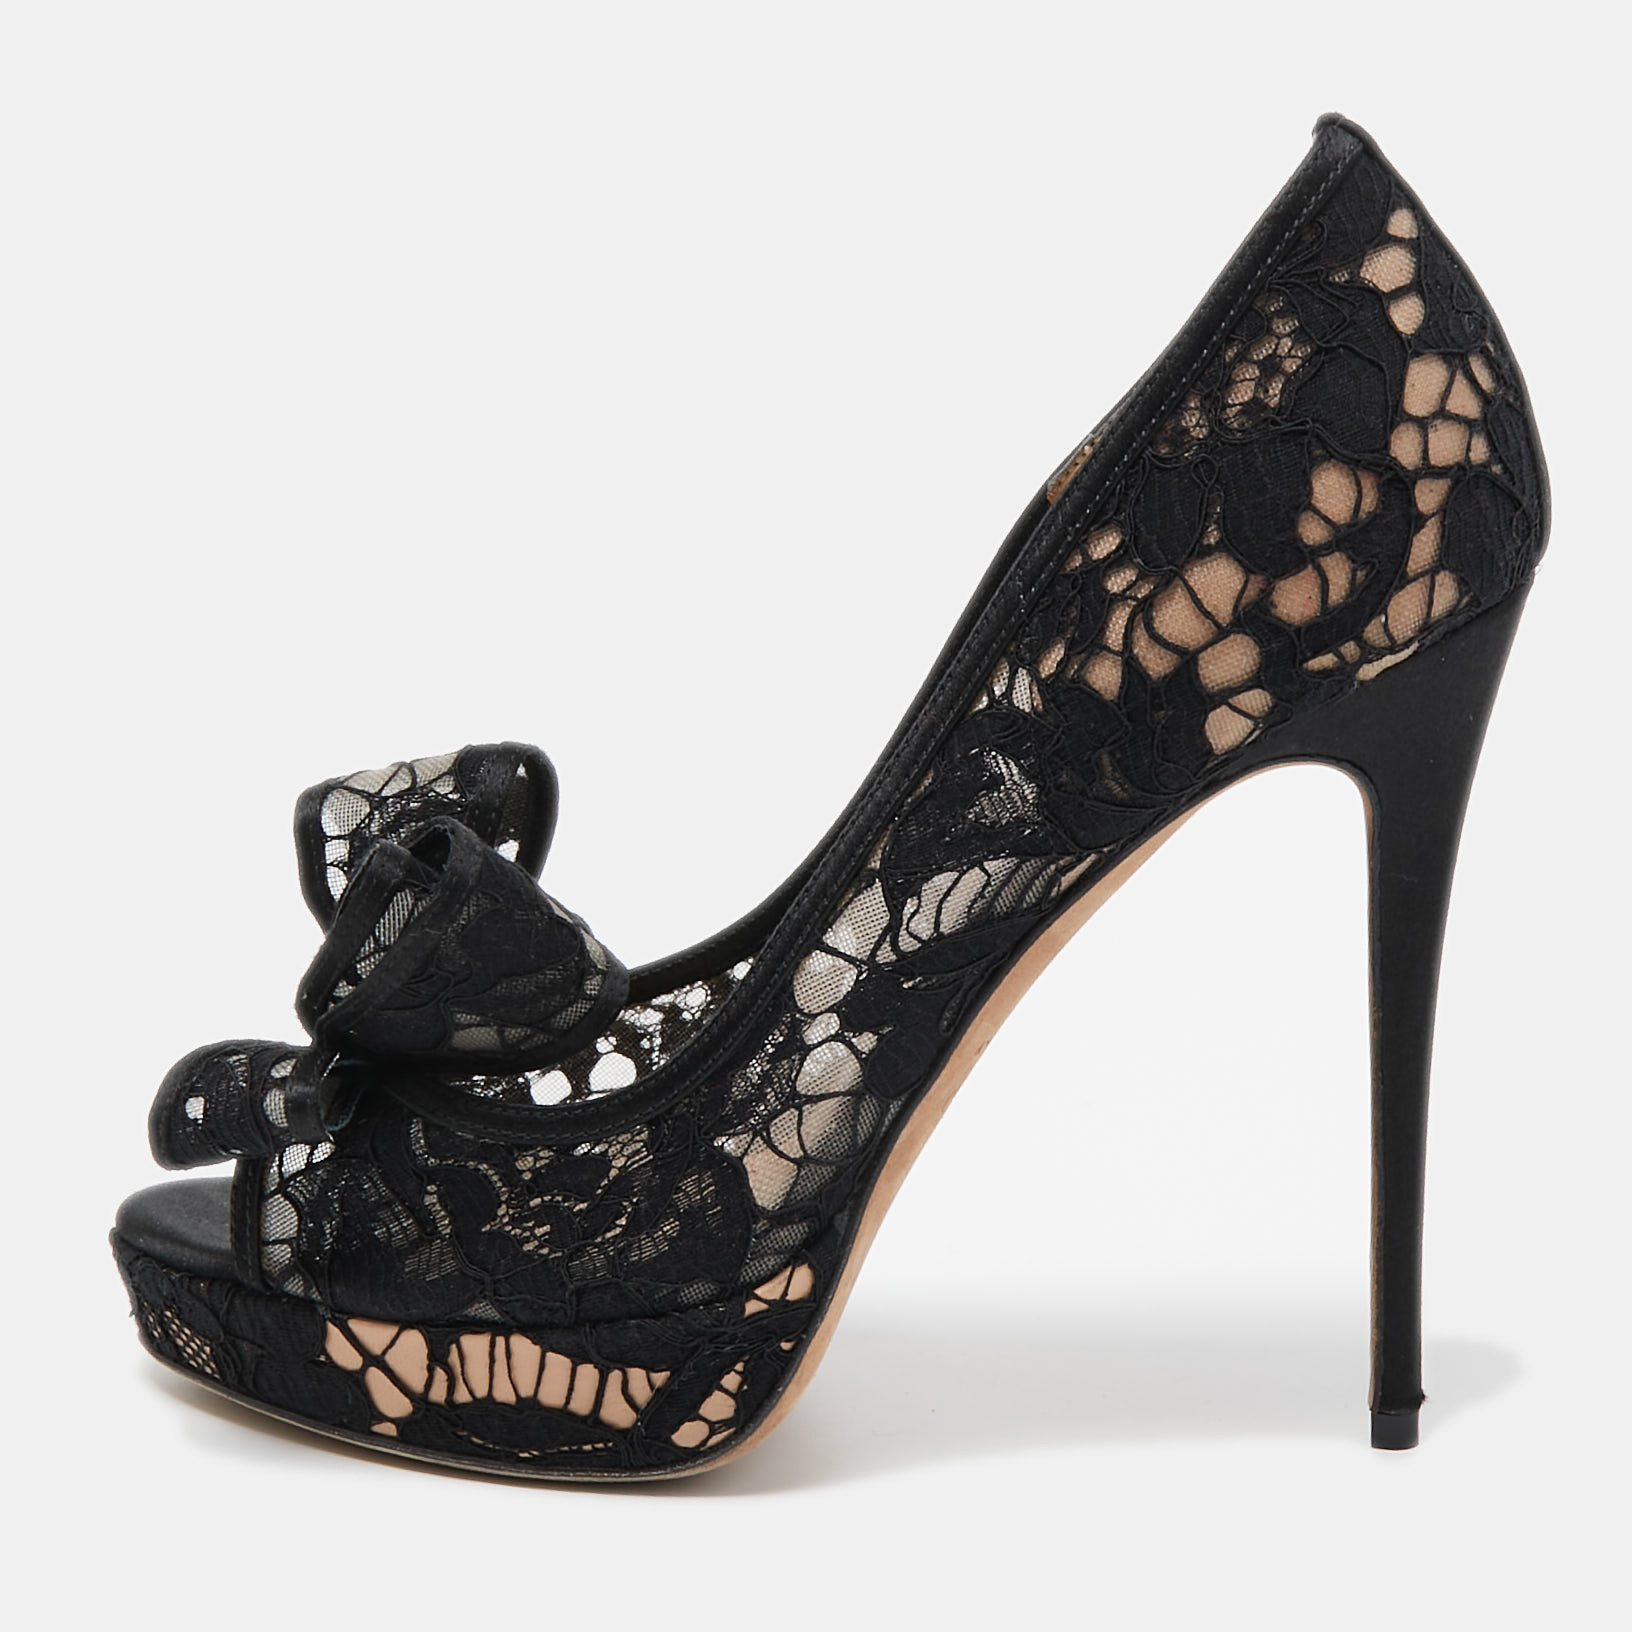 Valentino Black Lace And Mesh Bow Peep Toe Pumps Size 37